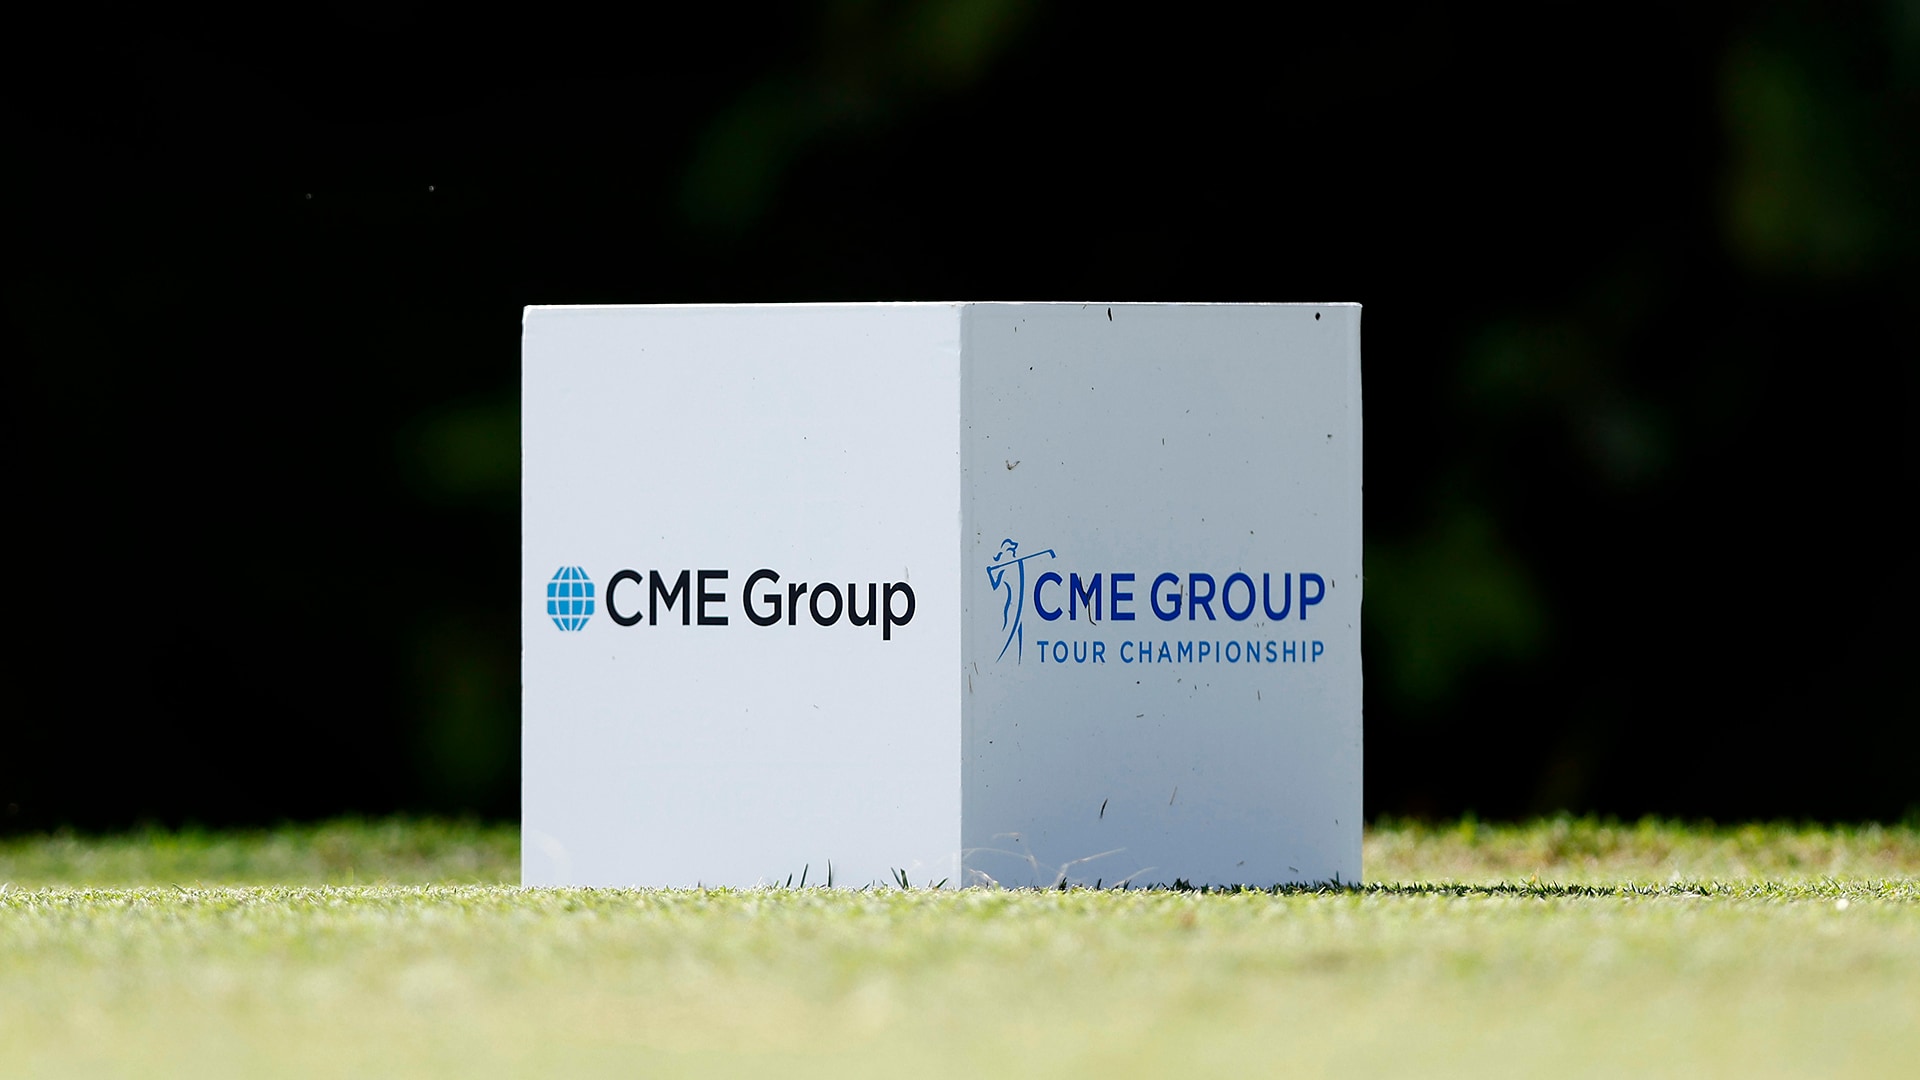 CME Group again bumps up purse, first-place prize for LPGA finale